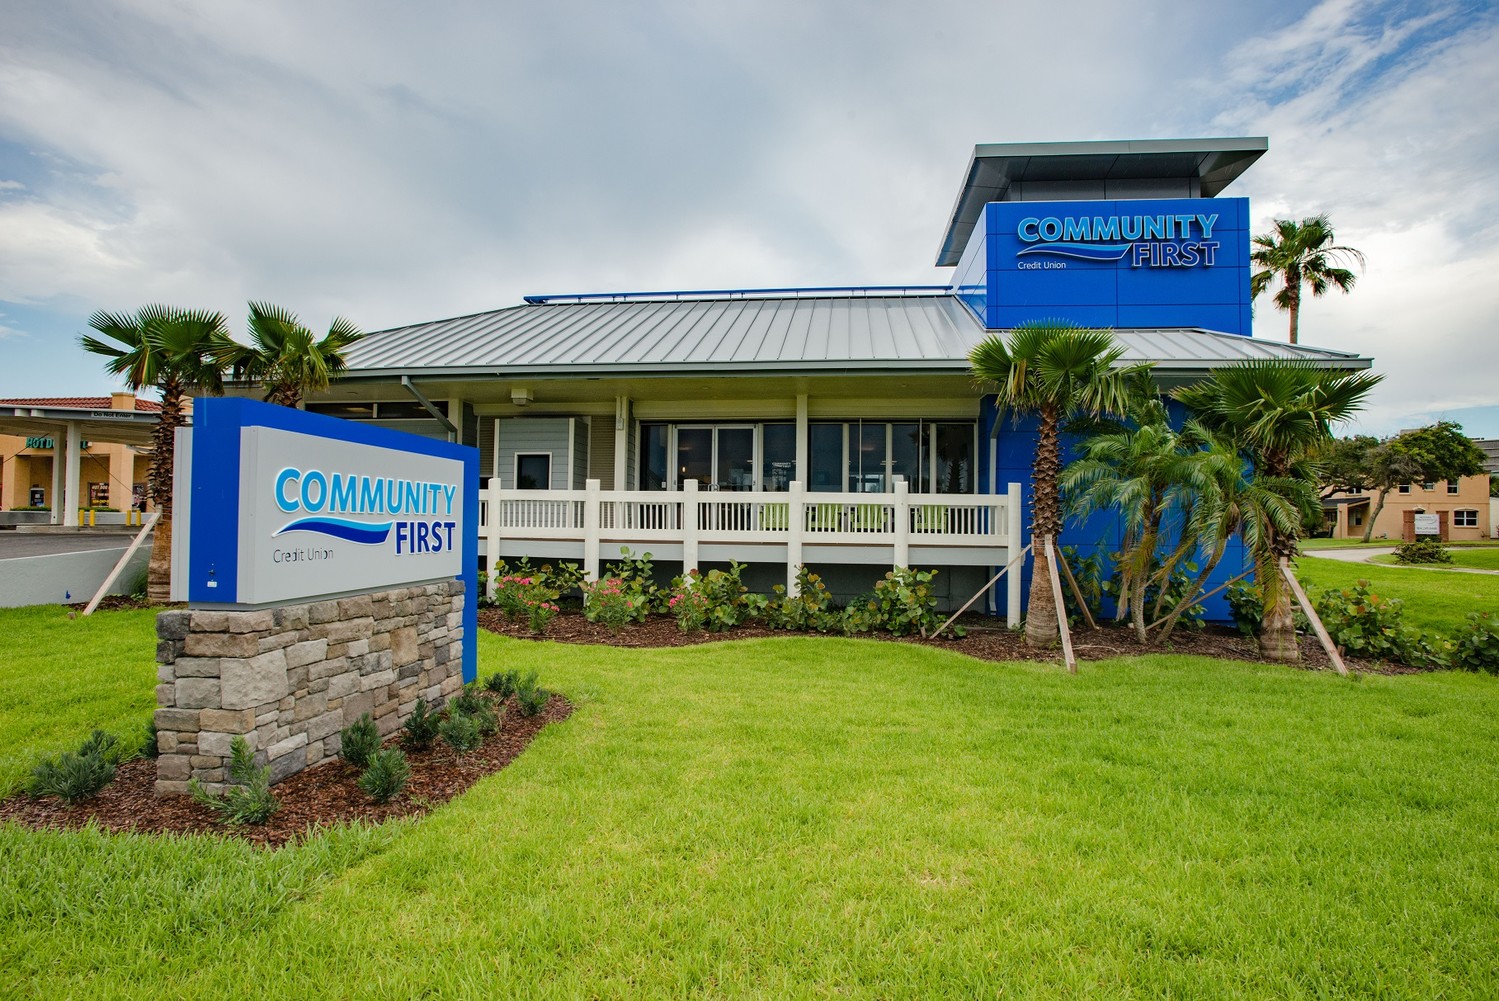 Community First Credit Union is located at 1451 S. Third Street in Jacksonville Beach.